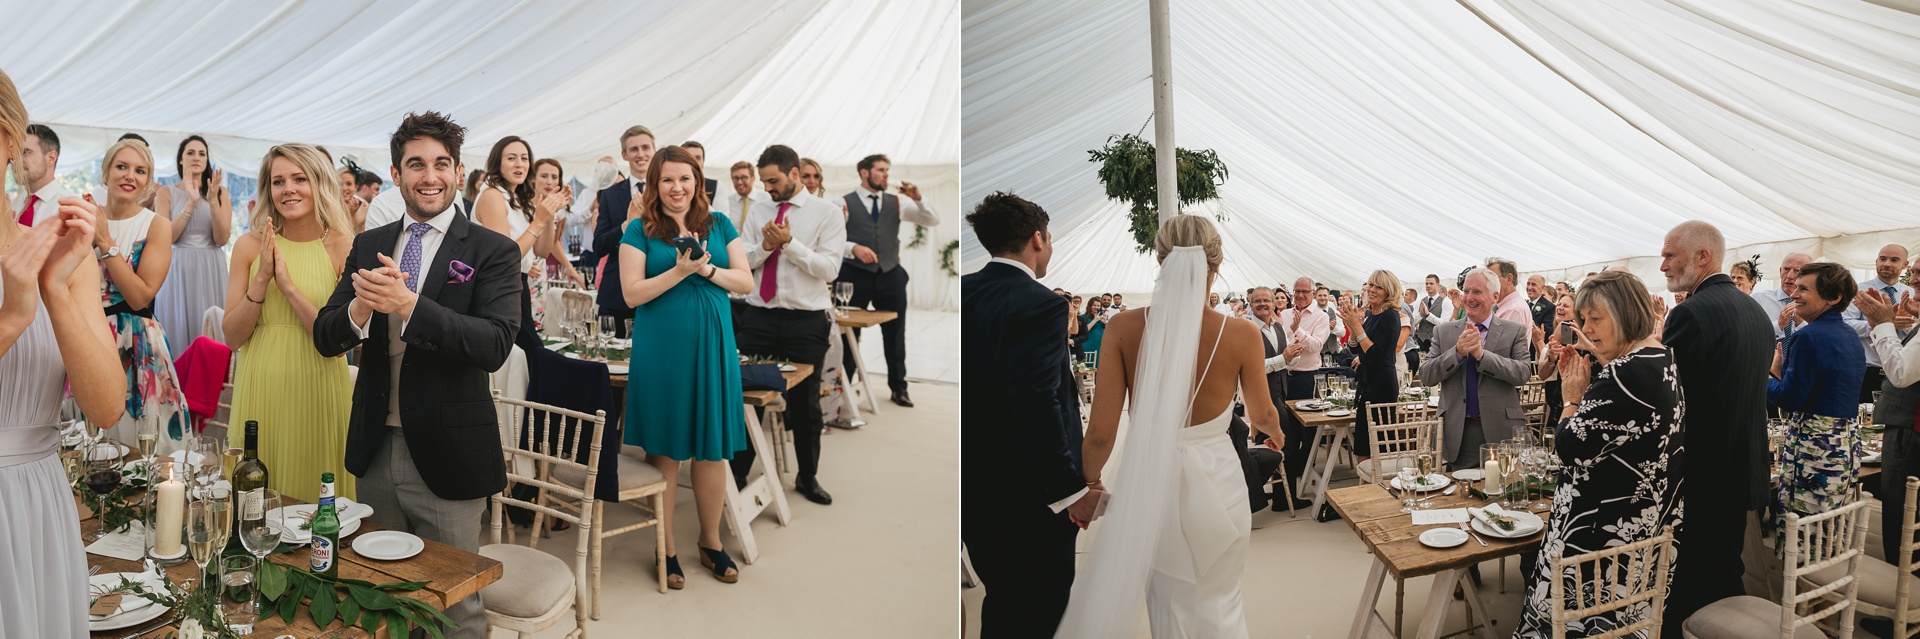 Guests cheering bride and groom into marquee